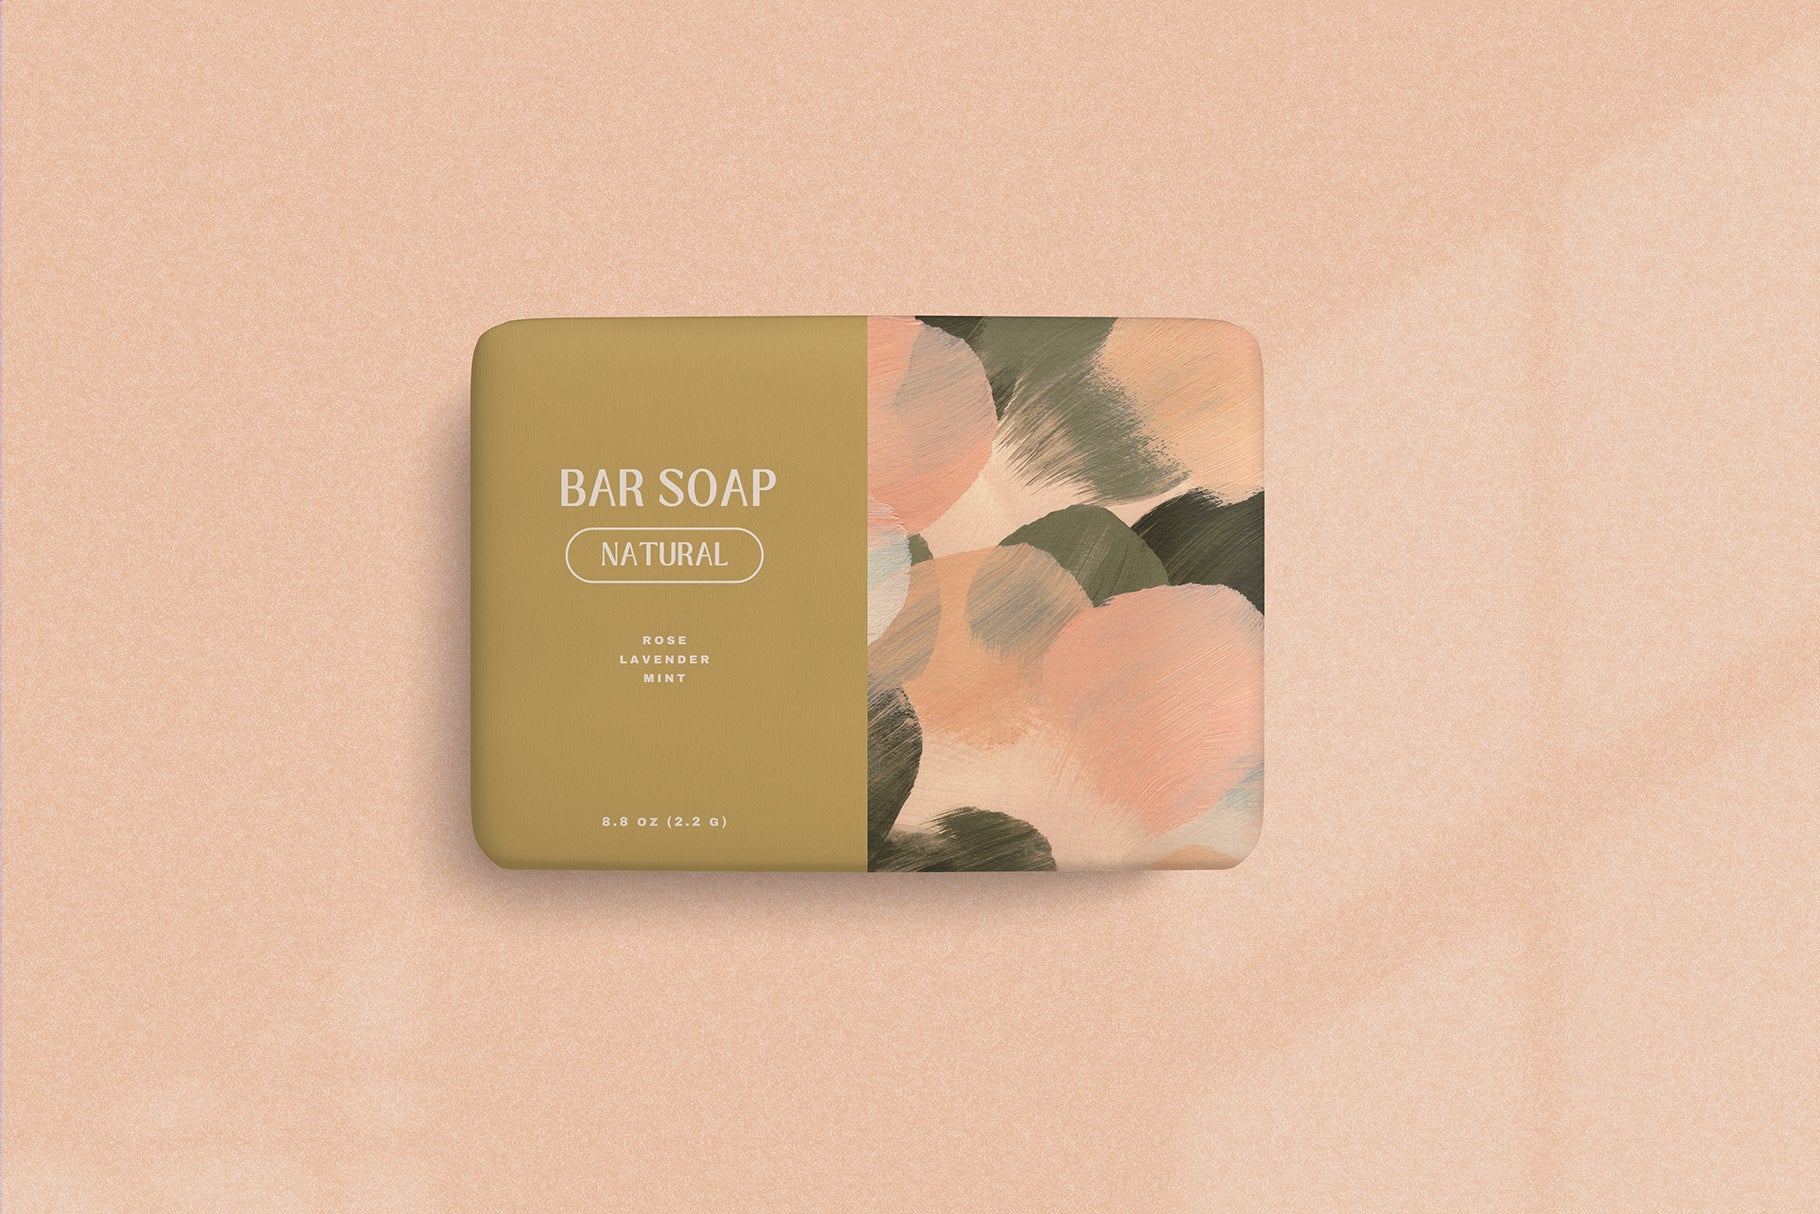 bar soap packaging design with artistic graphic elements 